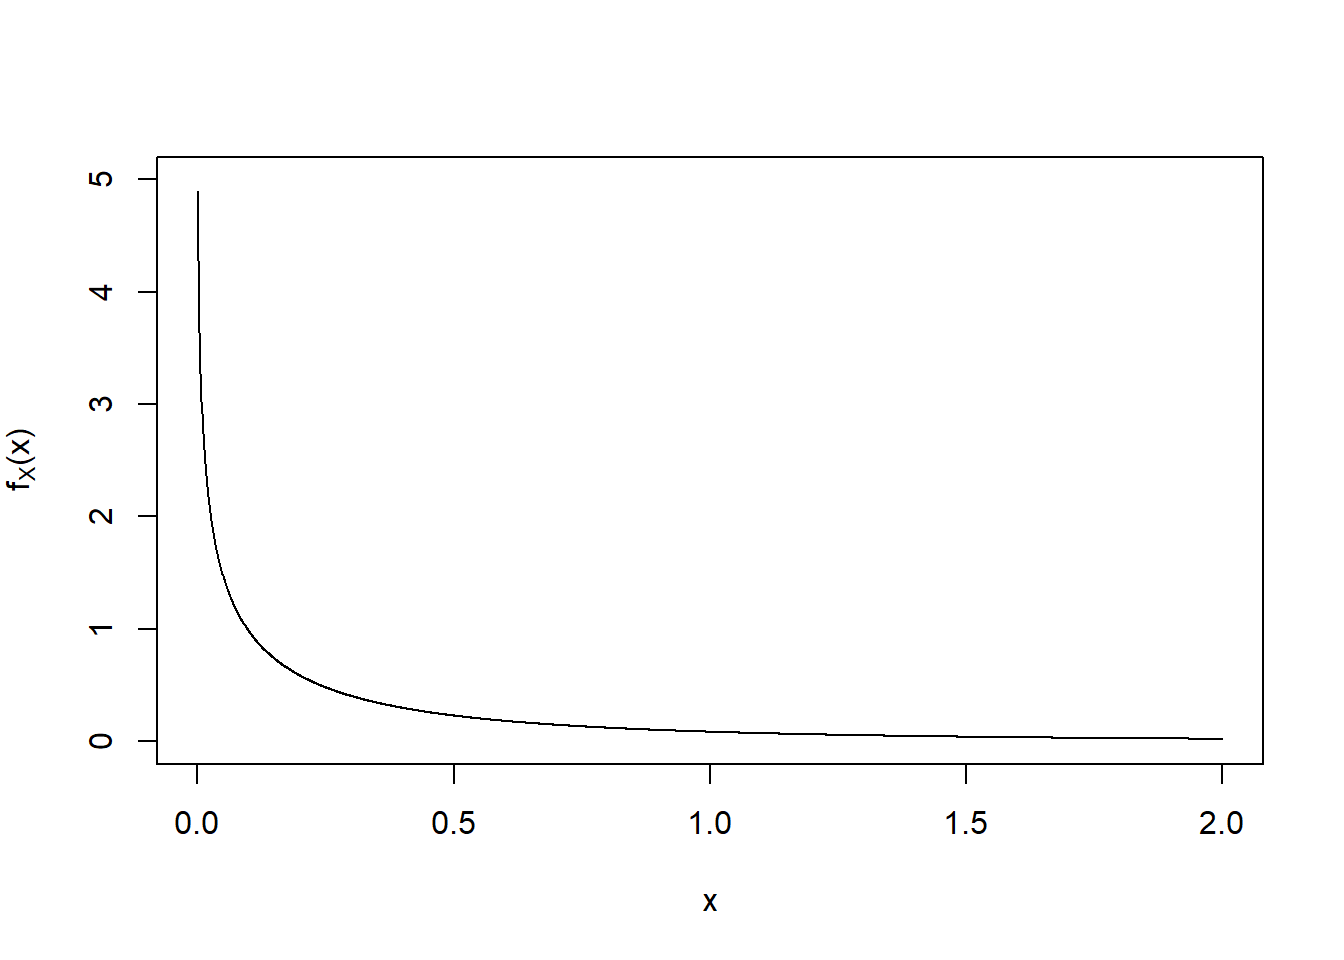 Plot of the p.d.f. of $X$.